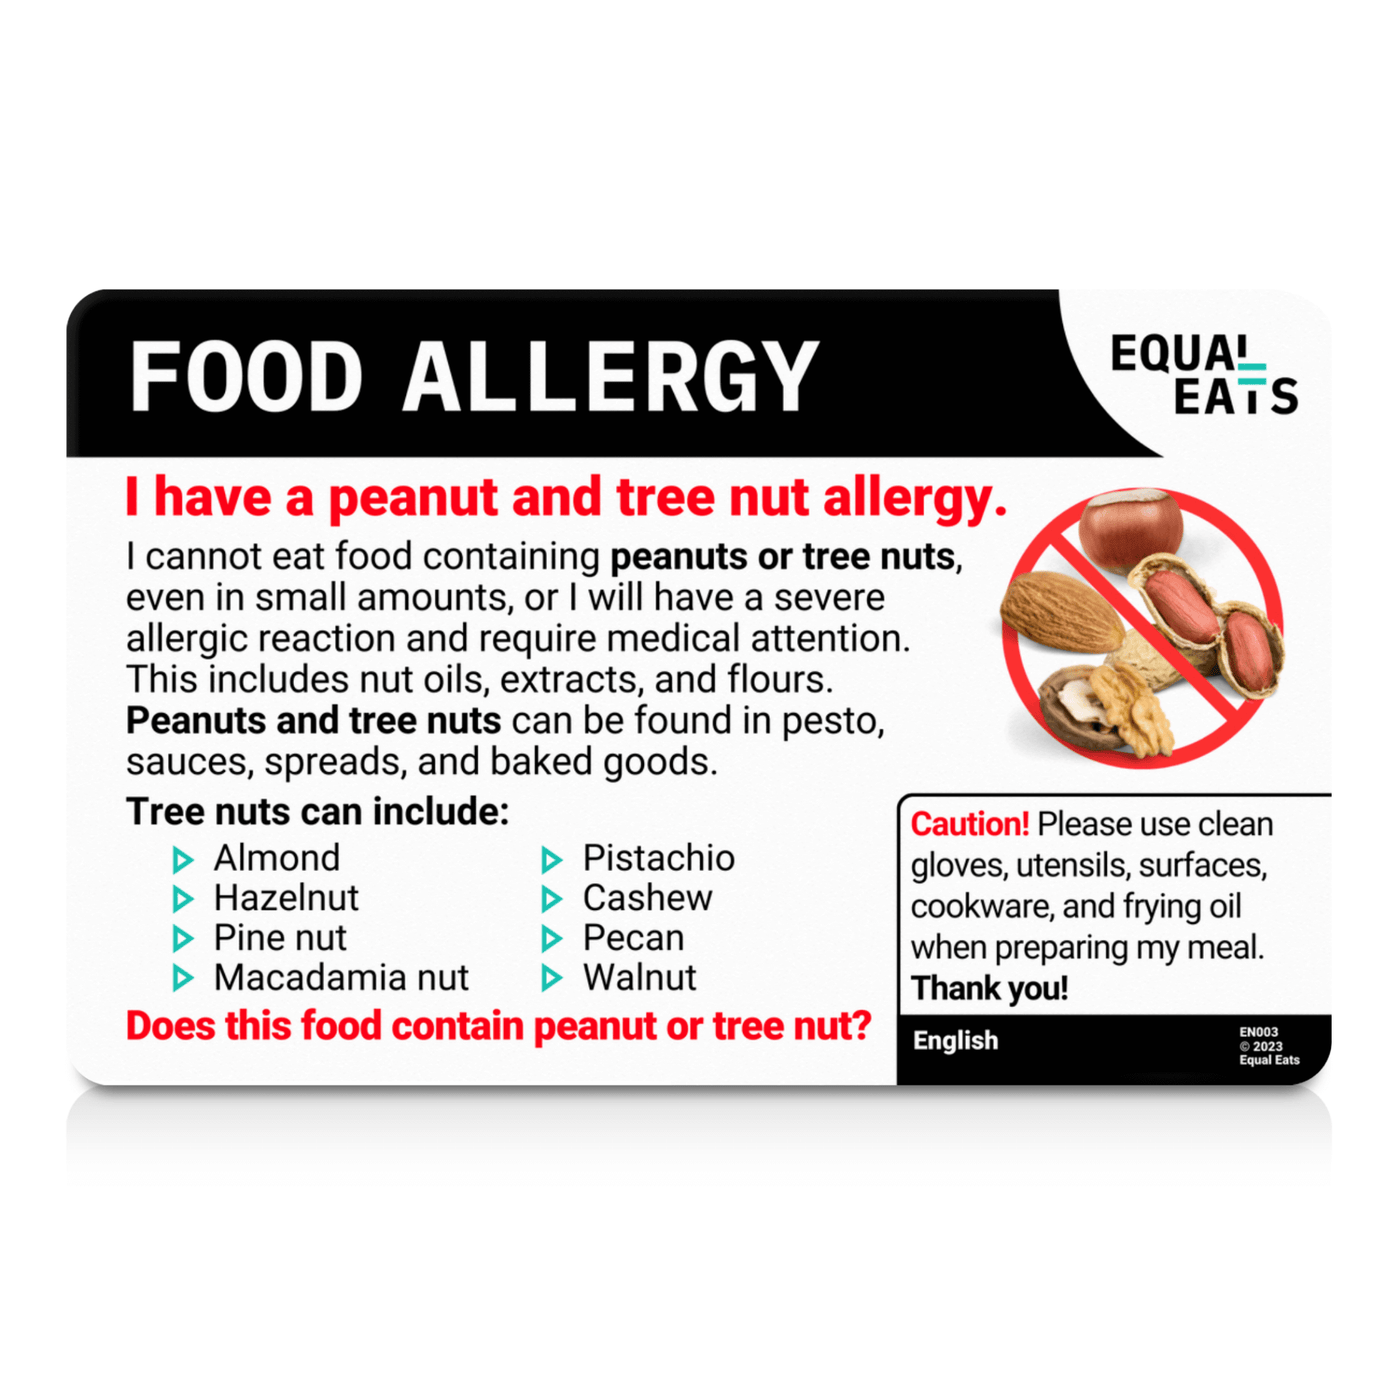 Lithuanian Peanut and Tree Nut Allergy Card